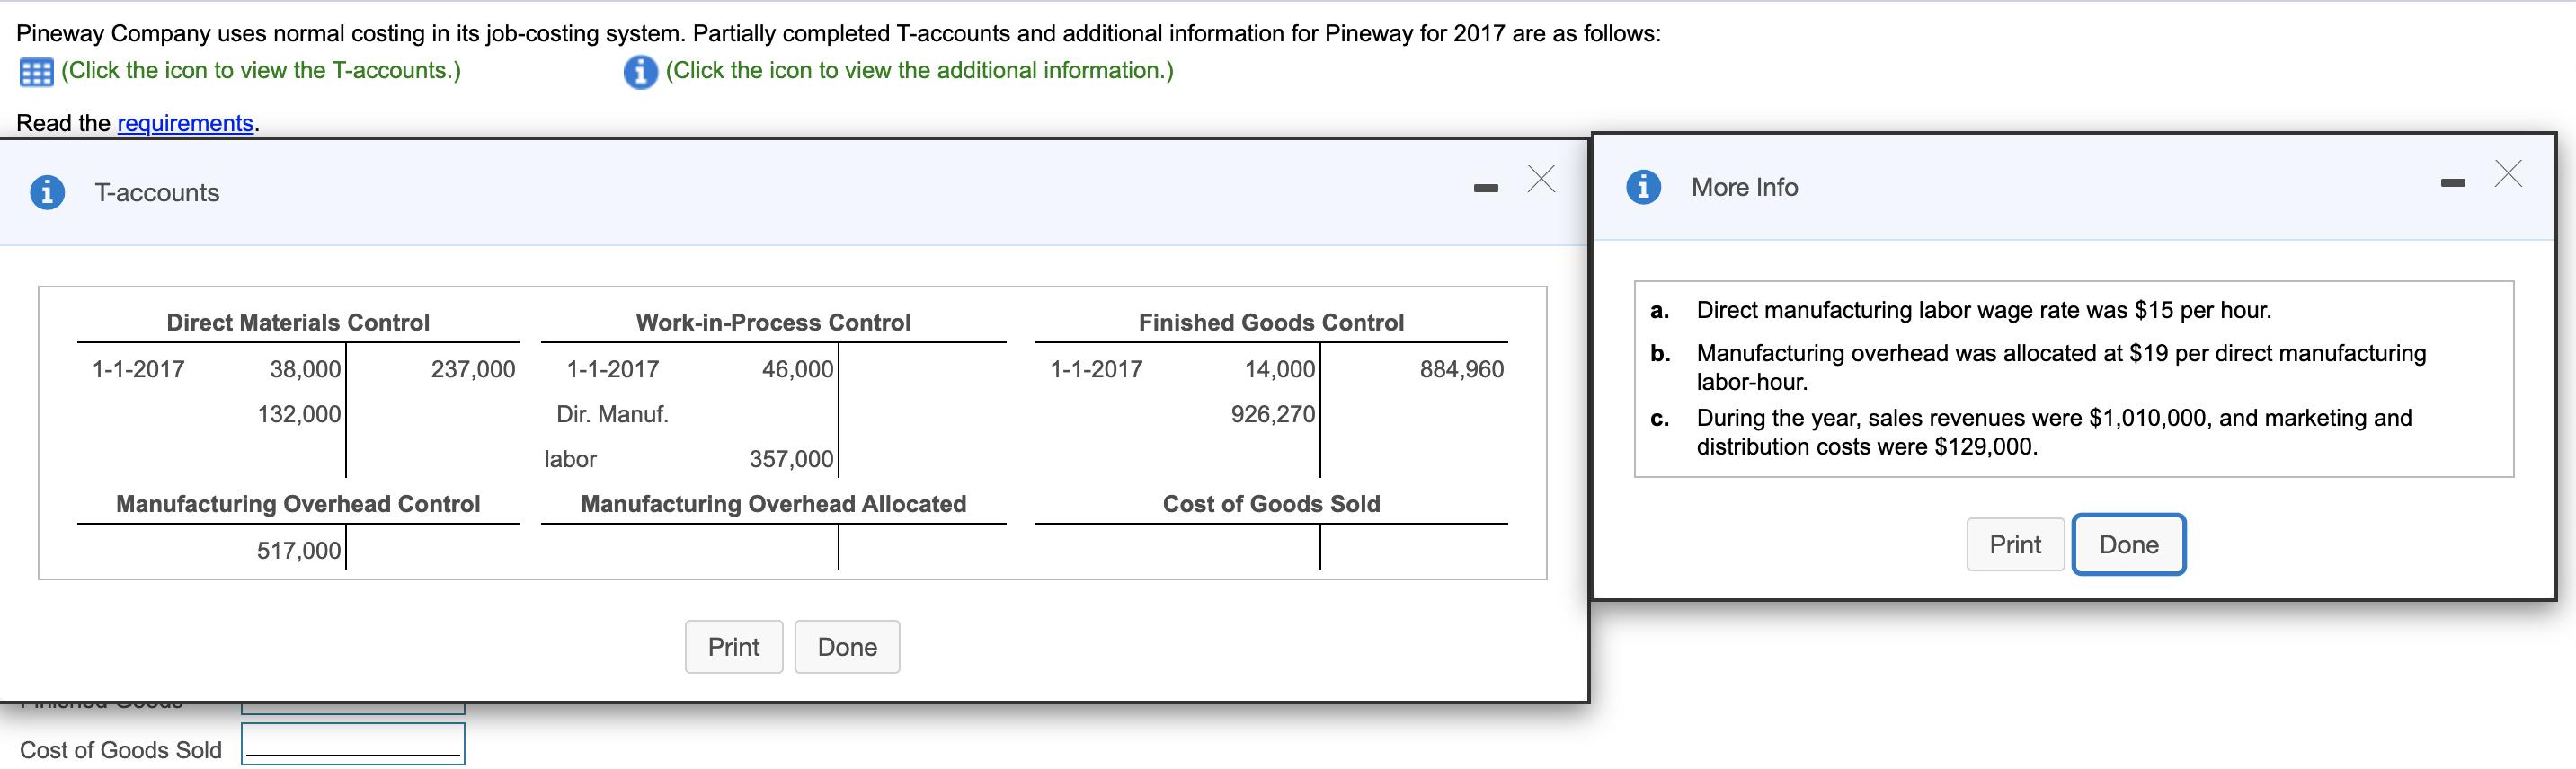 Pineway Company uses normal costing in its job-costing system. Partially completed T-accounts and additional information for